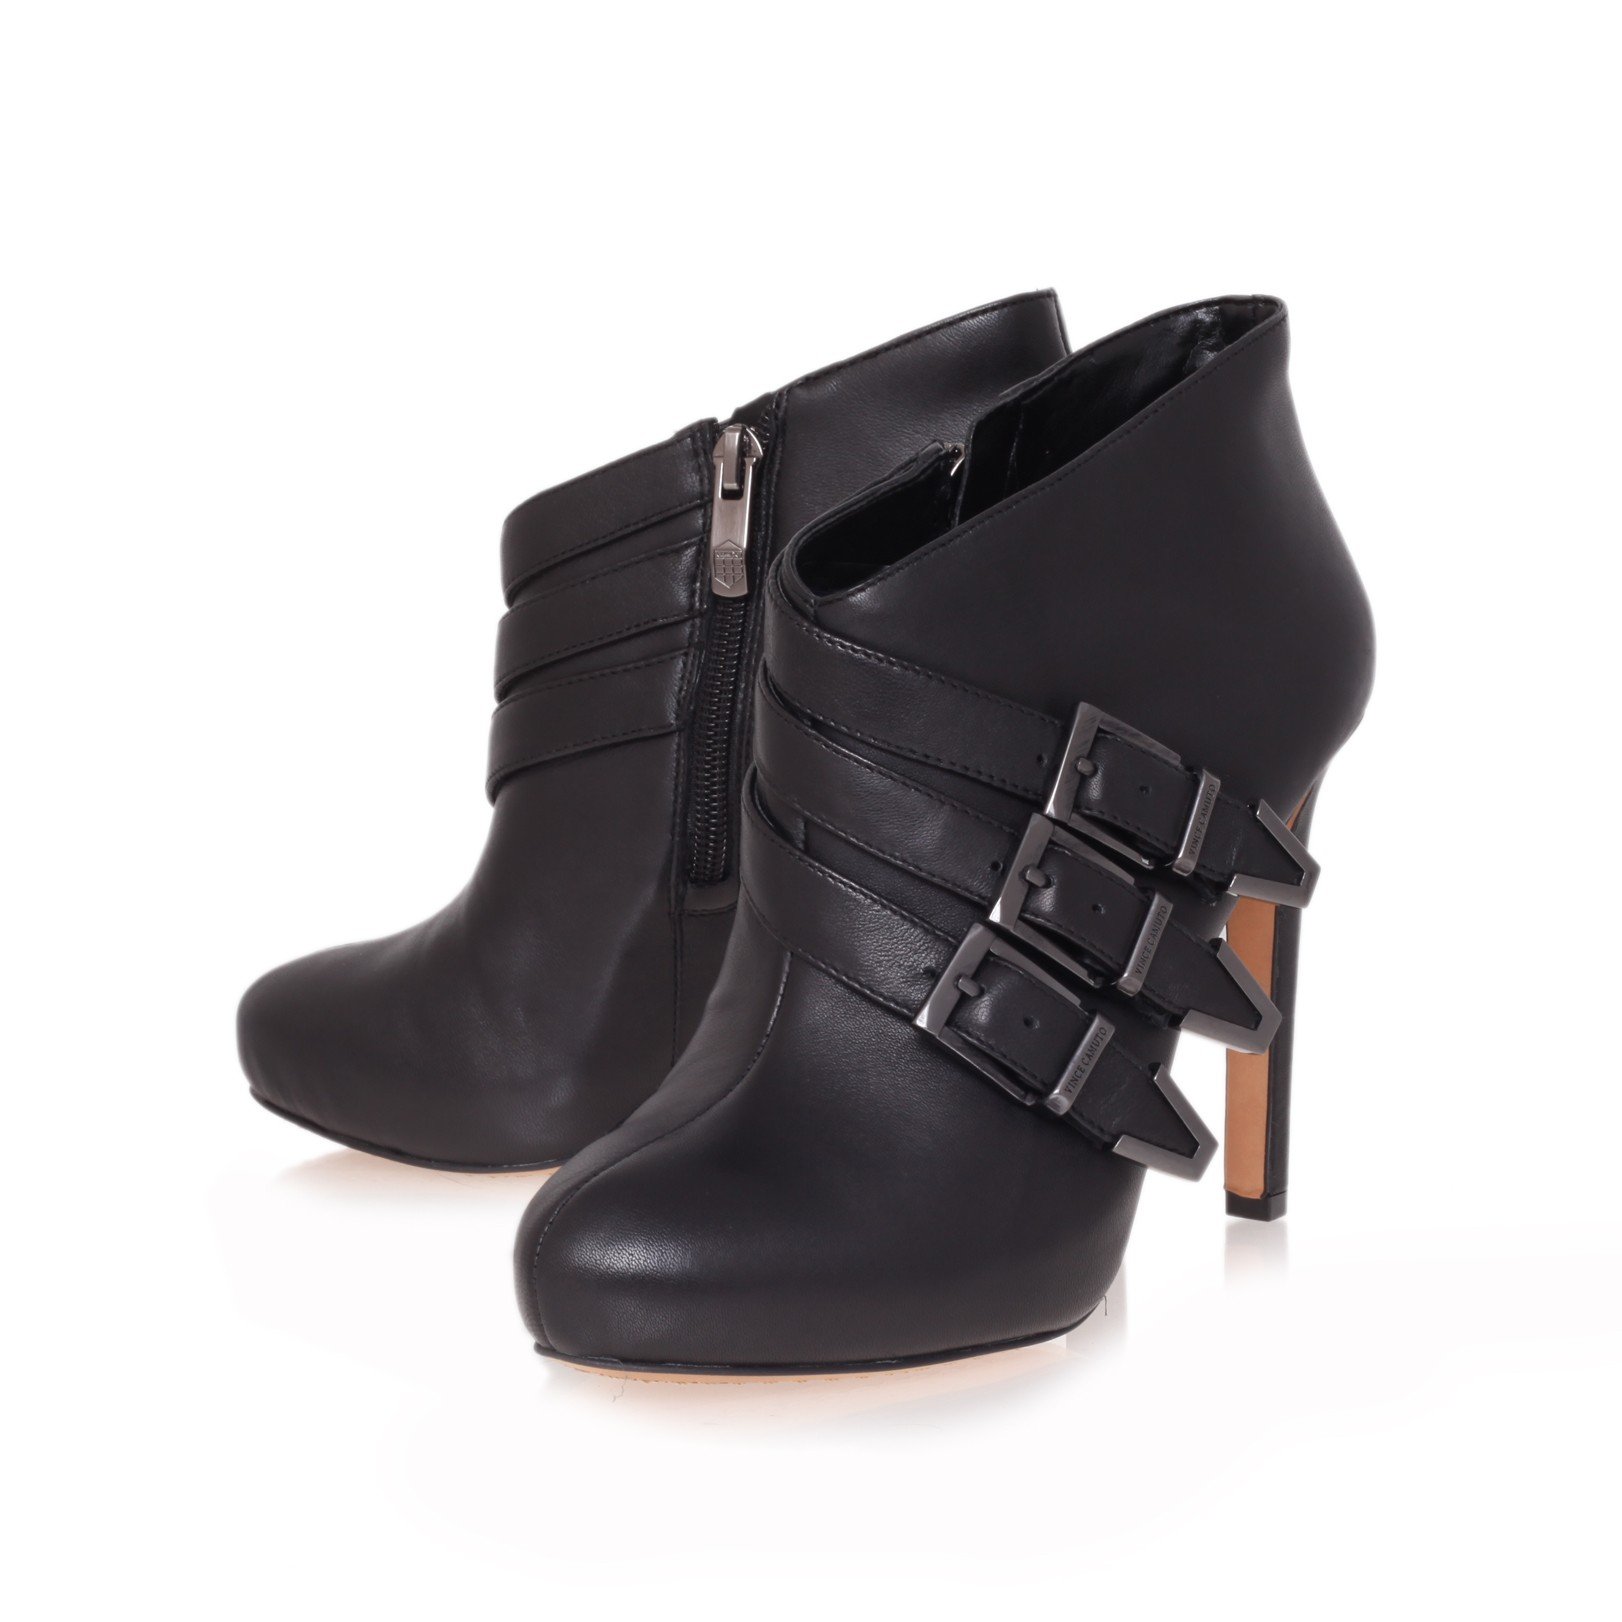 Vince camuto Ashia Shoe Boots in Black | Lyst